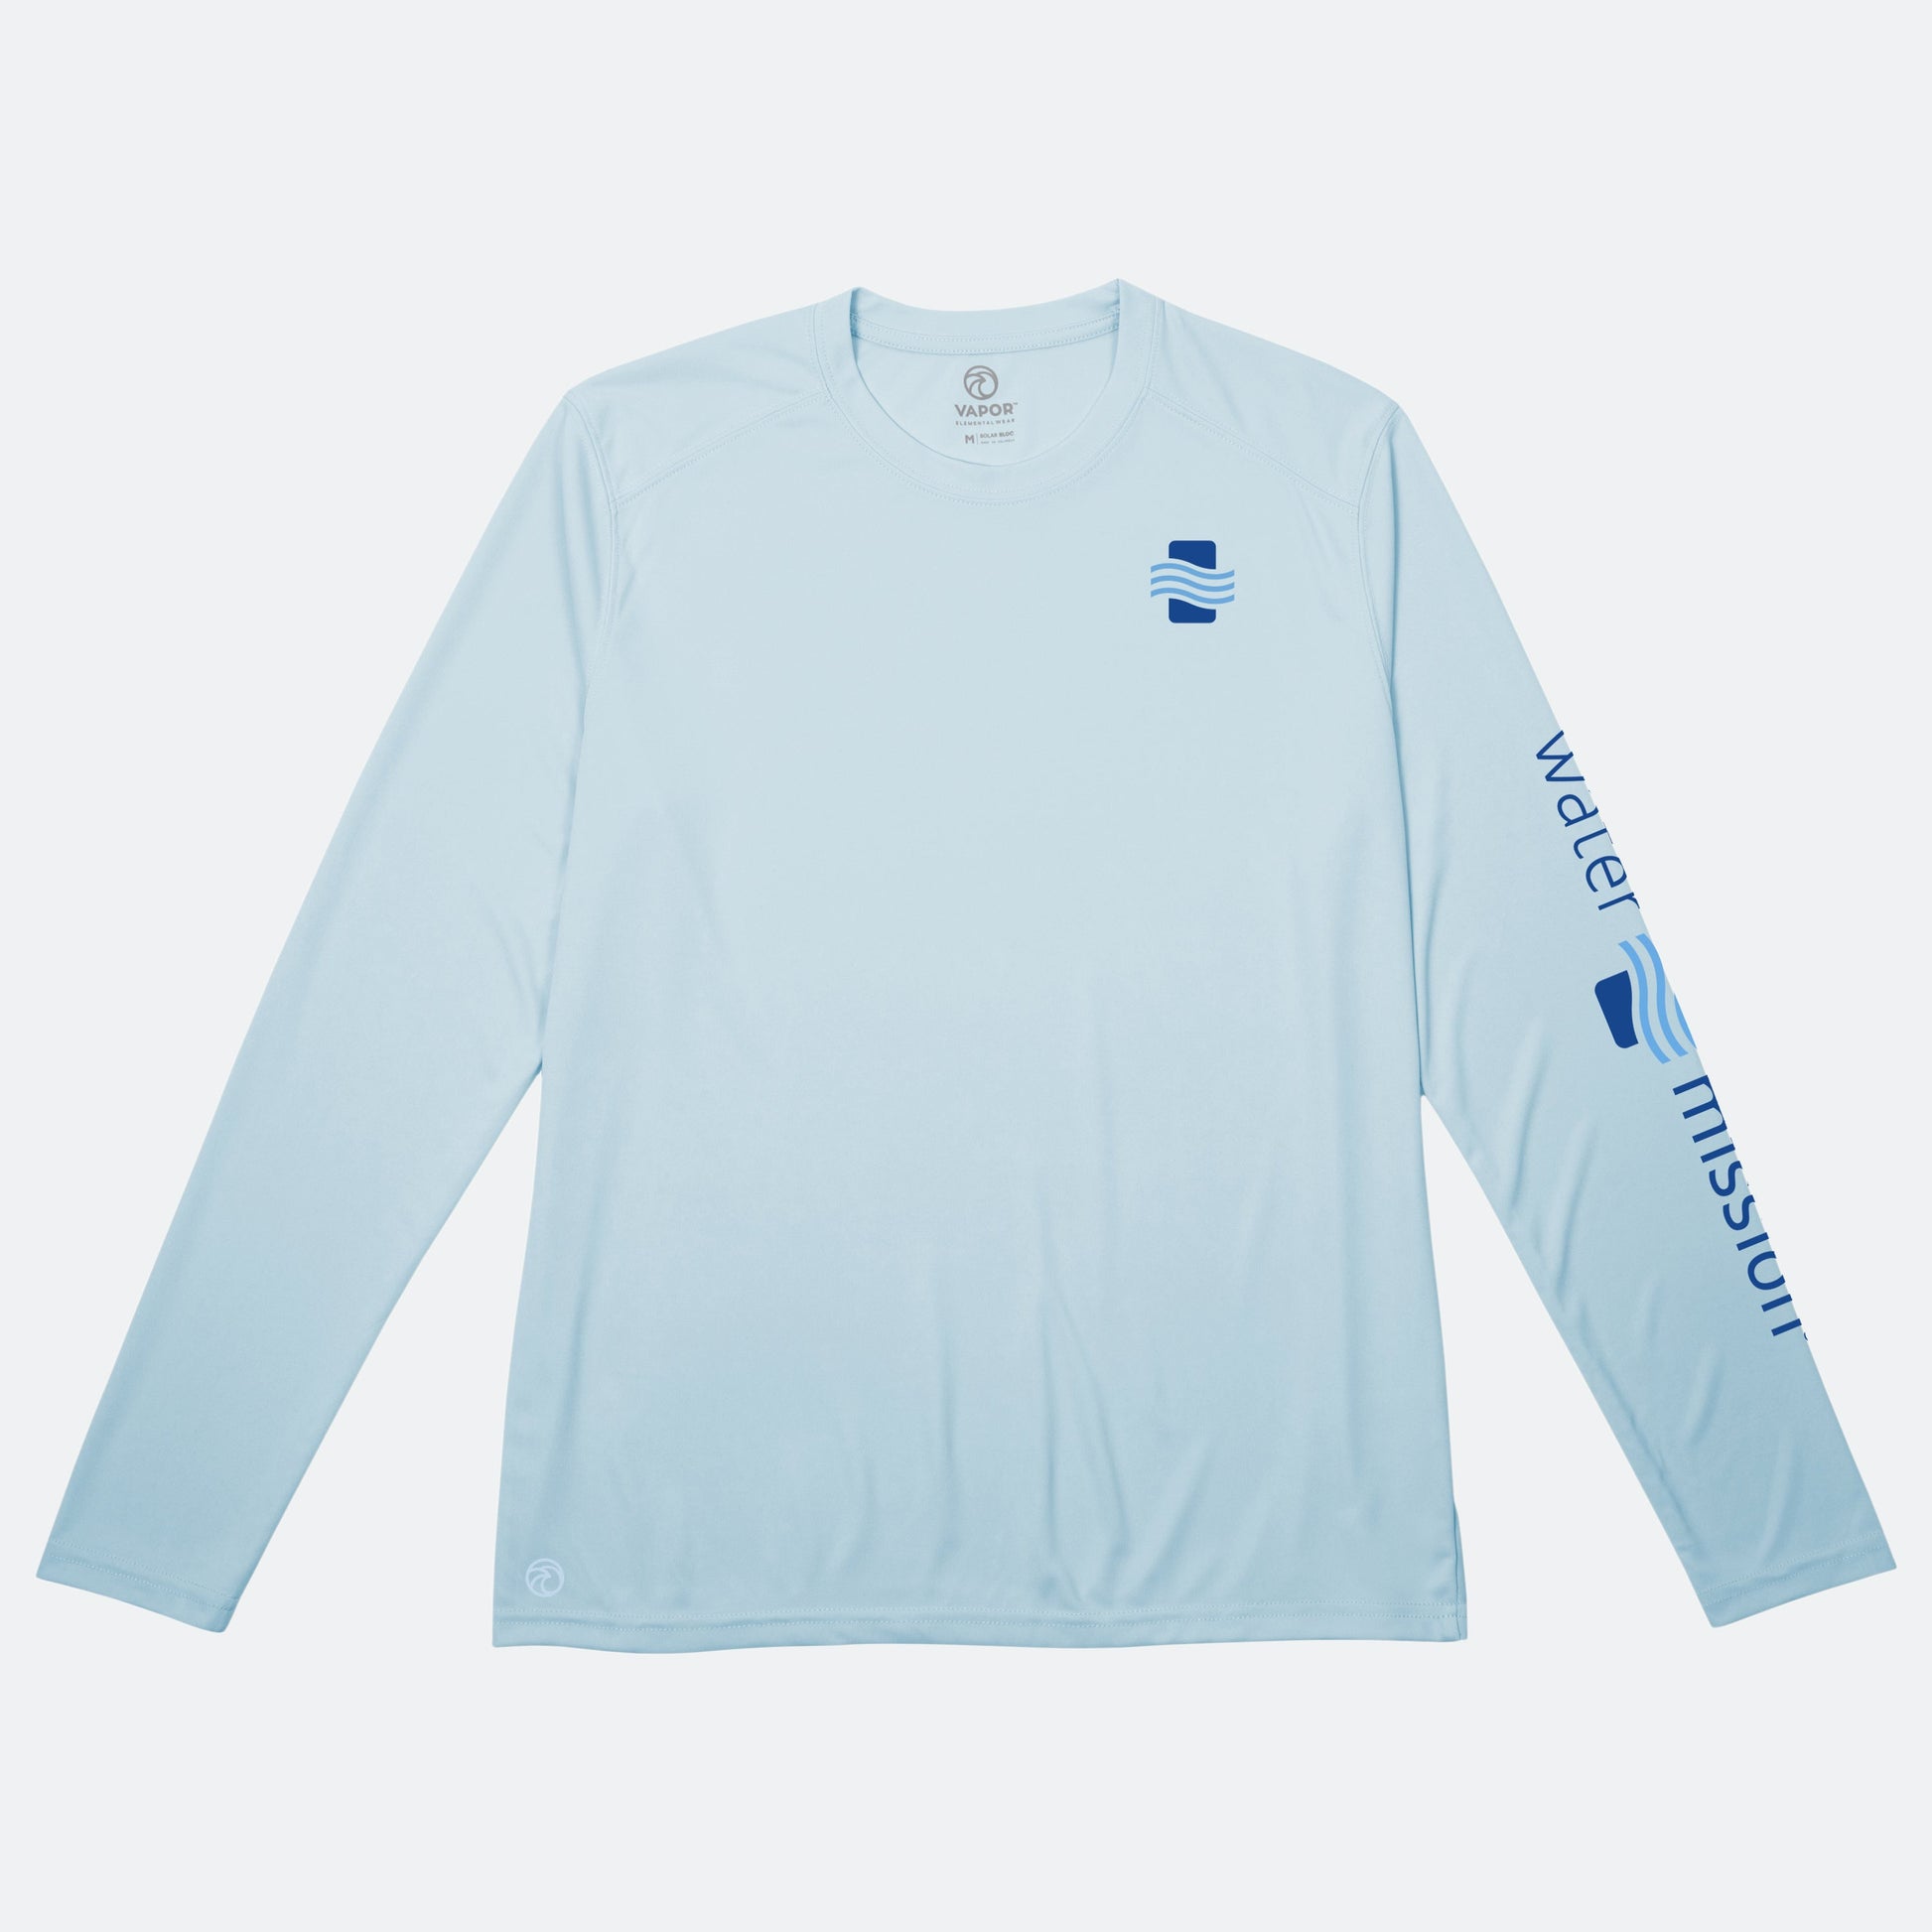 Water Mission Long Sleeve, Men's Performance Shirt